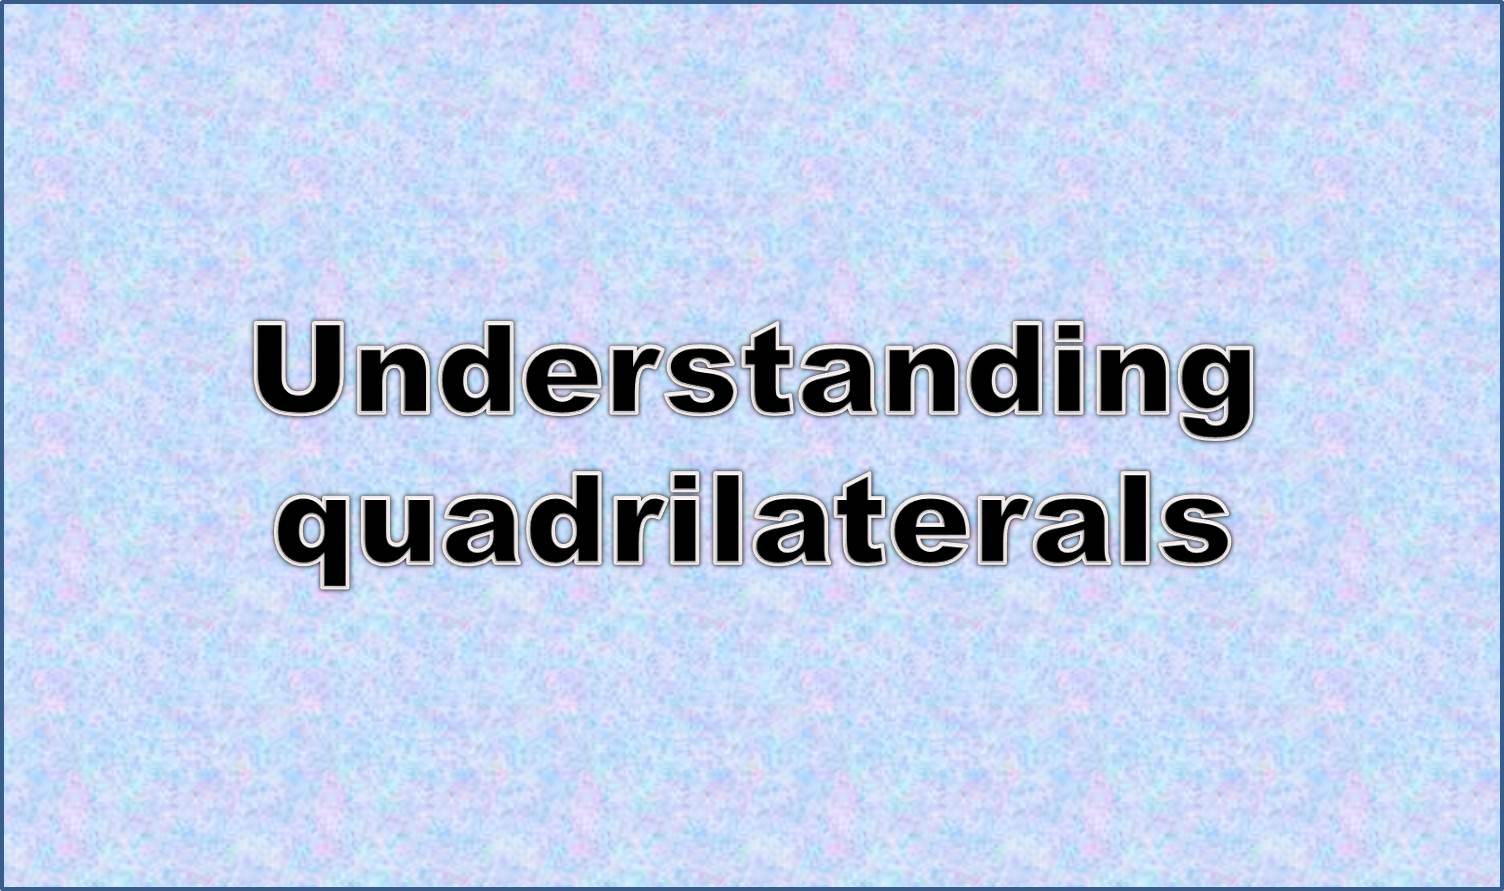 http://study.aisectonline.com/images/Intro to quadrilaterals.jpg